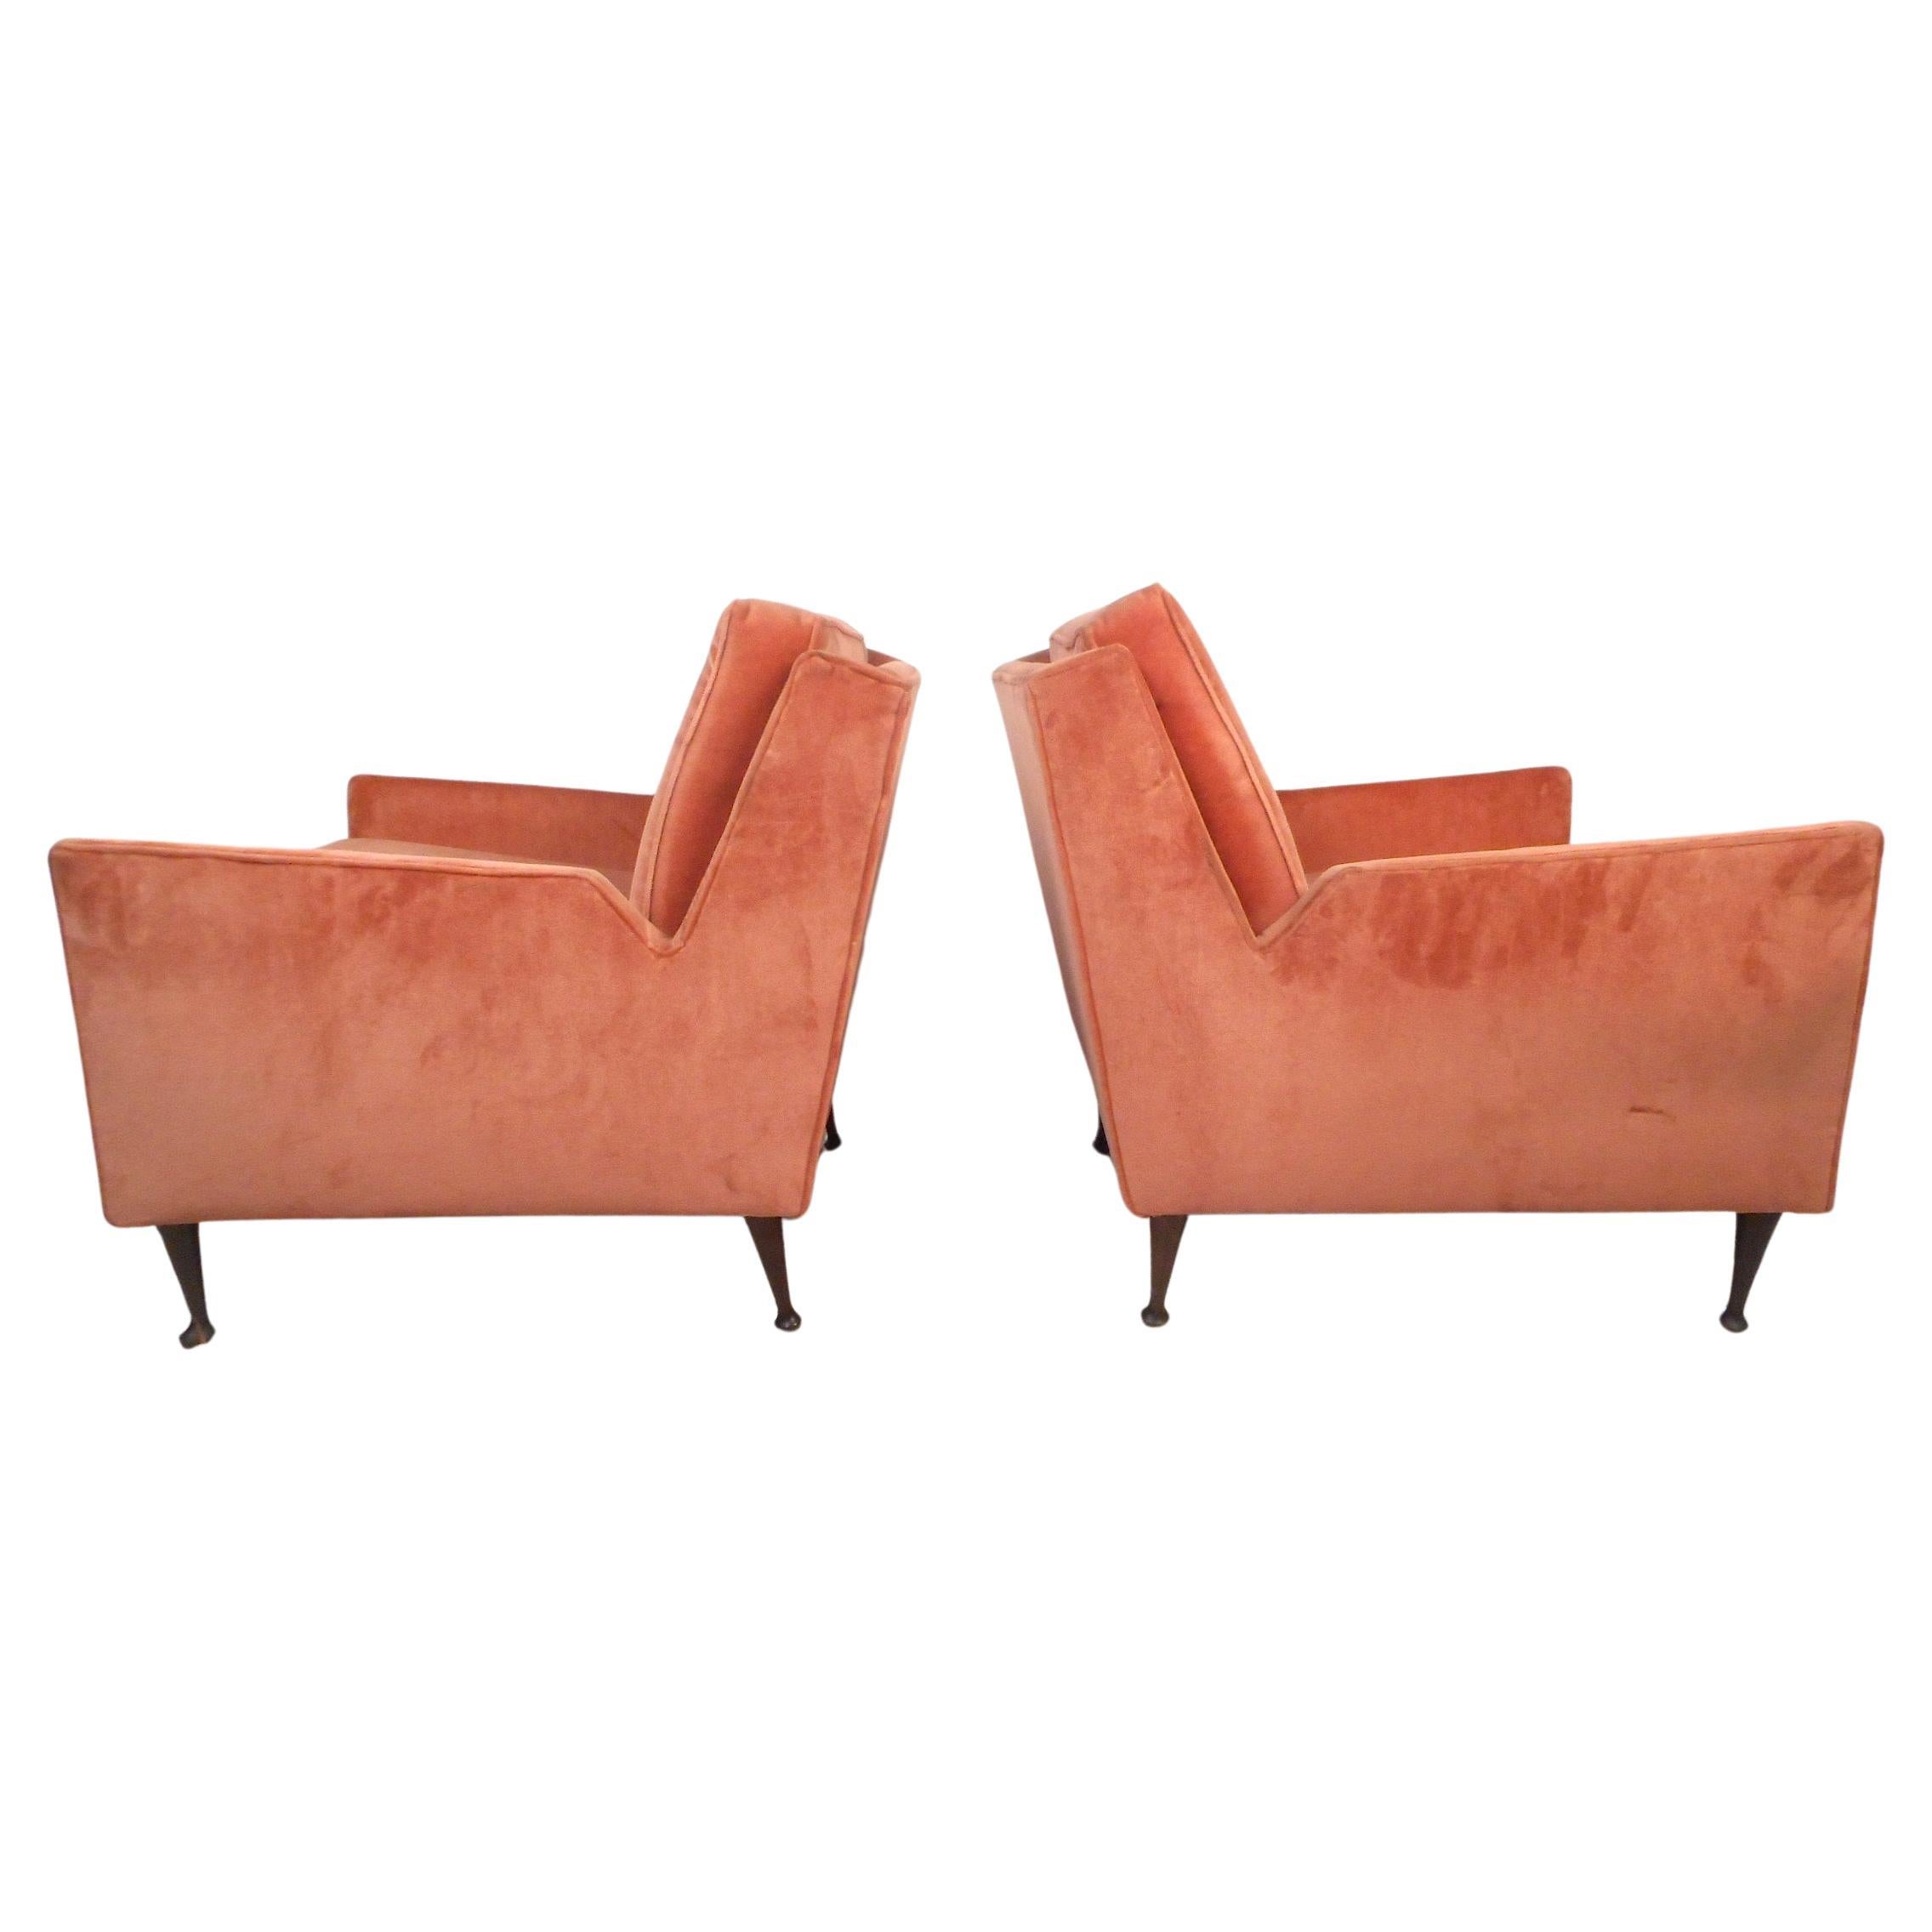 Pair of Midcentury Lounge Chairs after McCobb